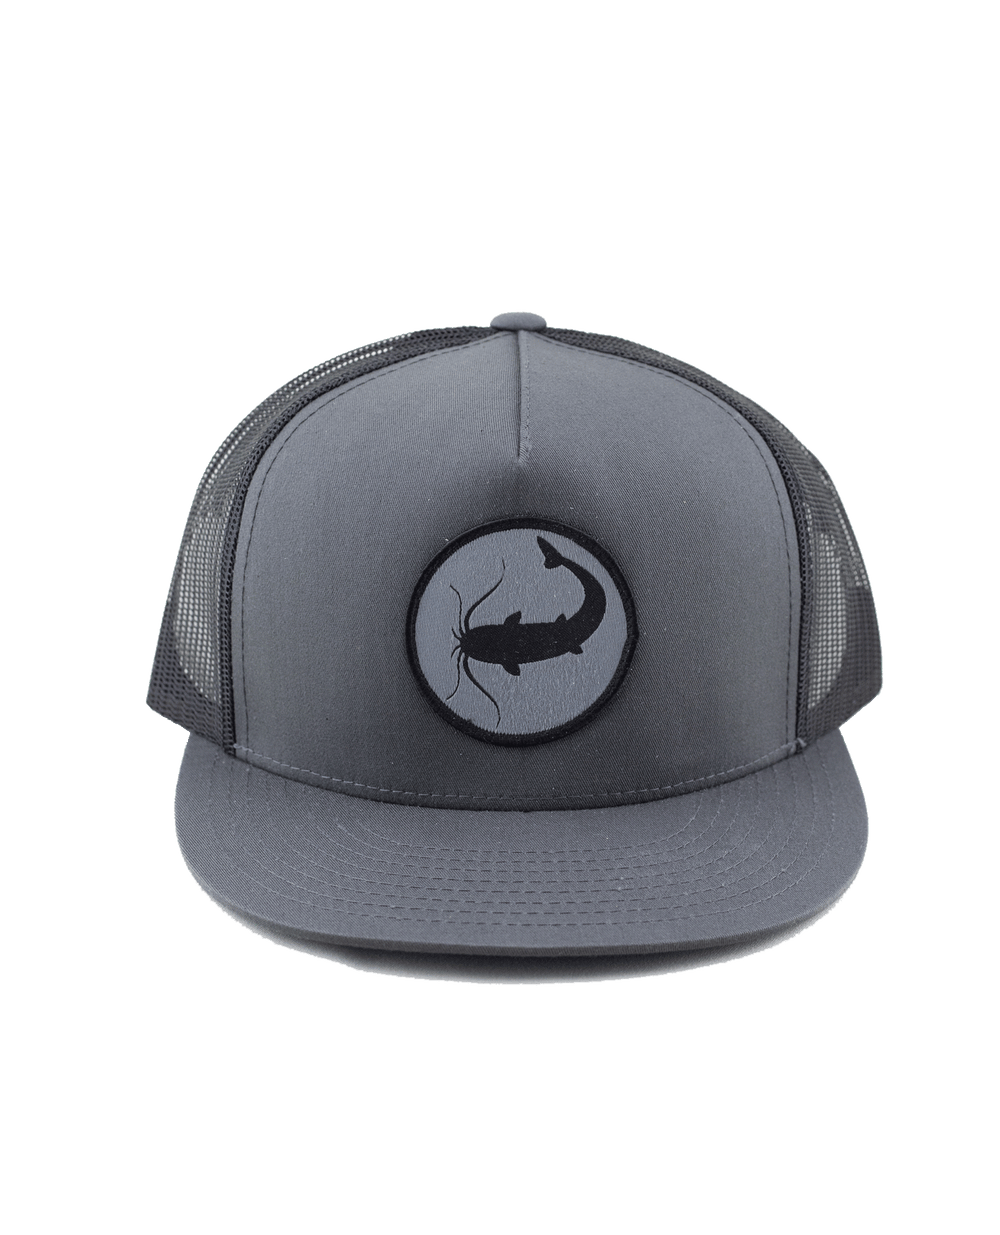 Catfish Patch Hat - 2-Tone Charcoal - 4 Trucker